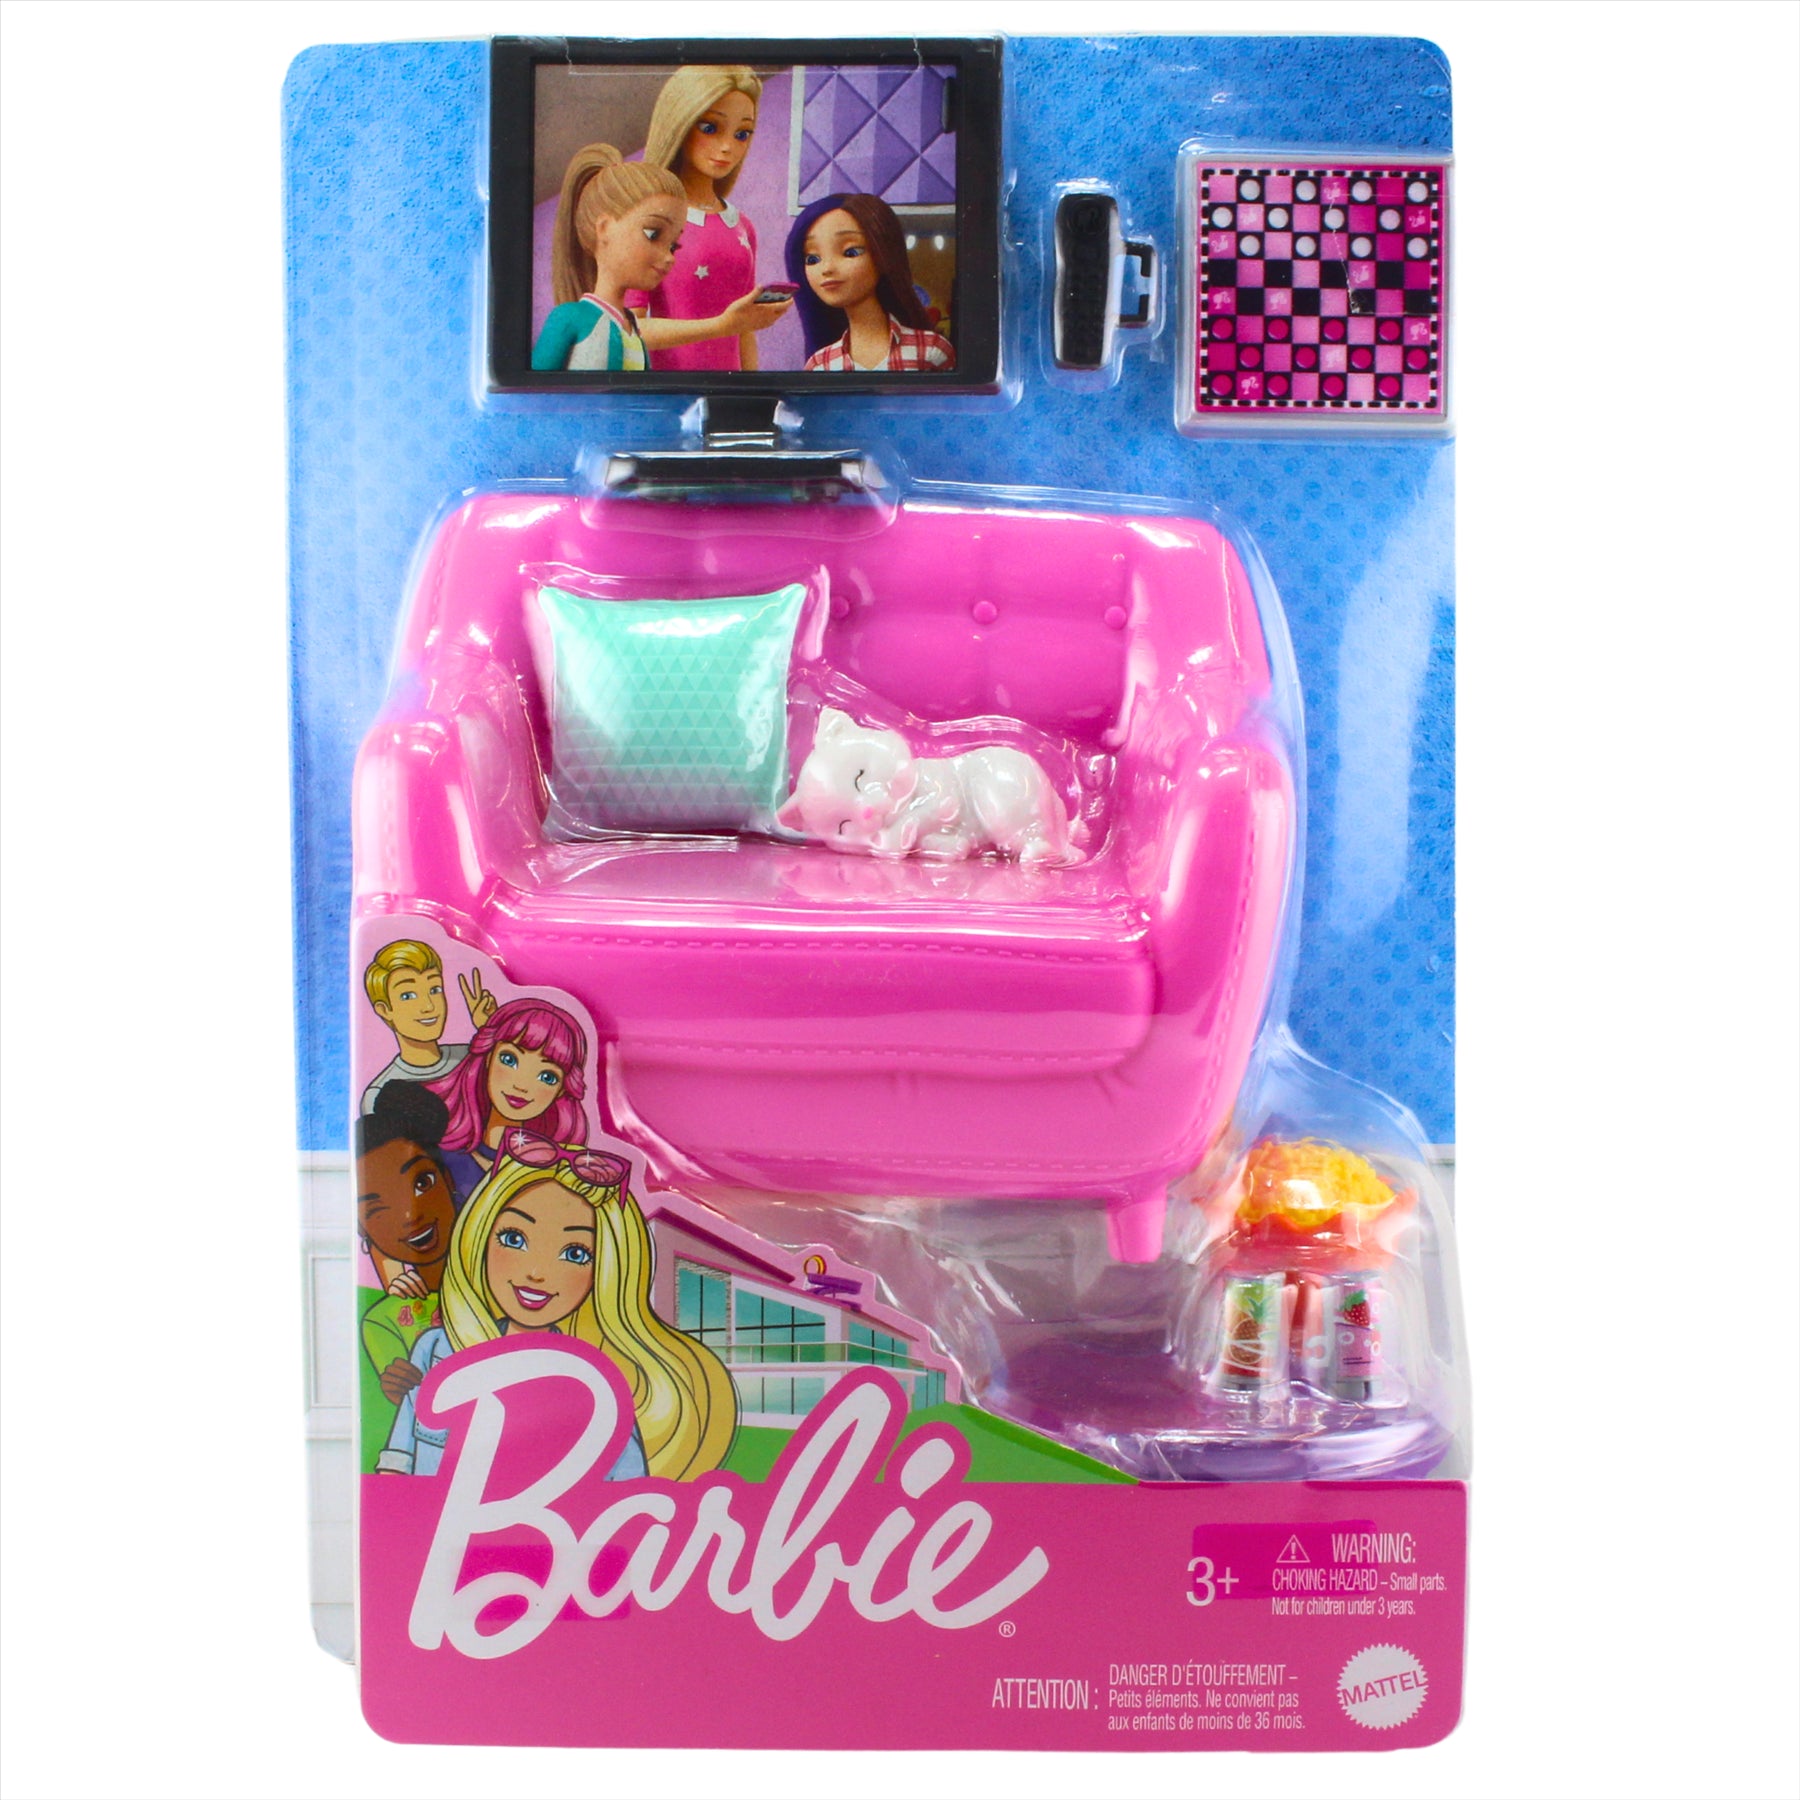 Barbie Movie and Game Night Playset with Cat and Accessories - Includes Kitten Figure, Furniture, Television, Game, and Snacks - Toptoys2u